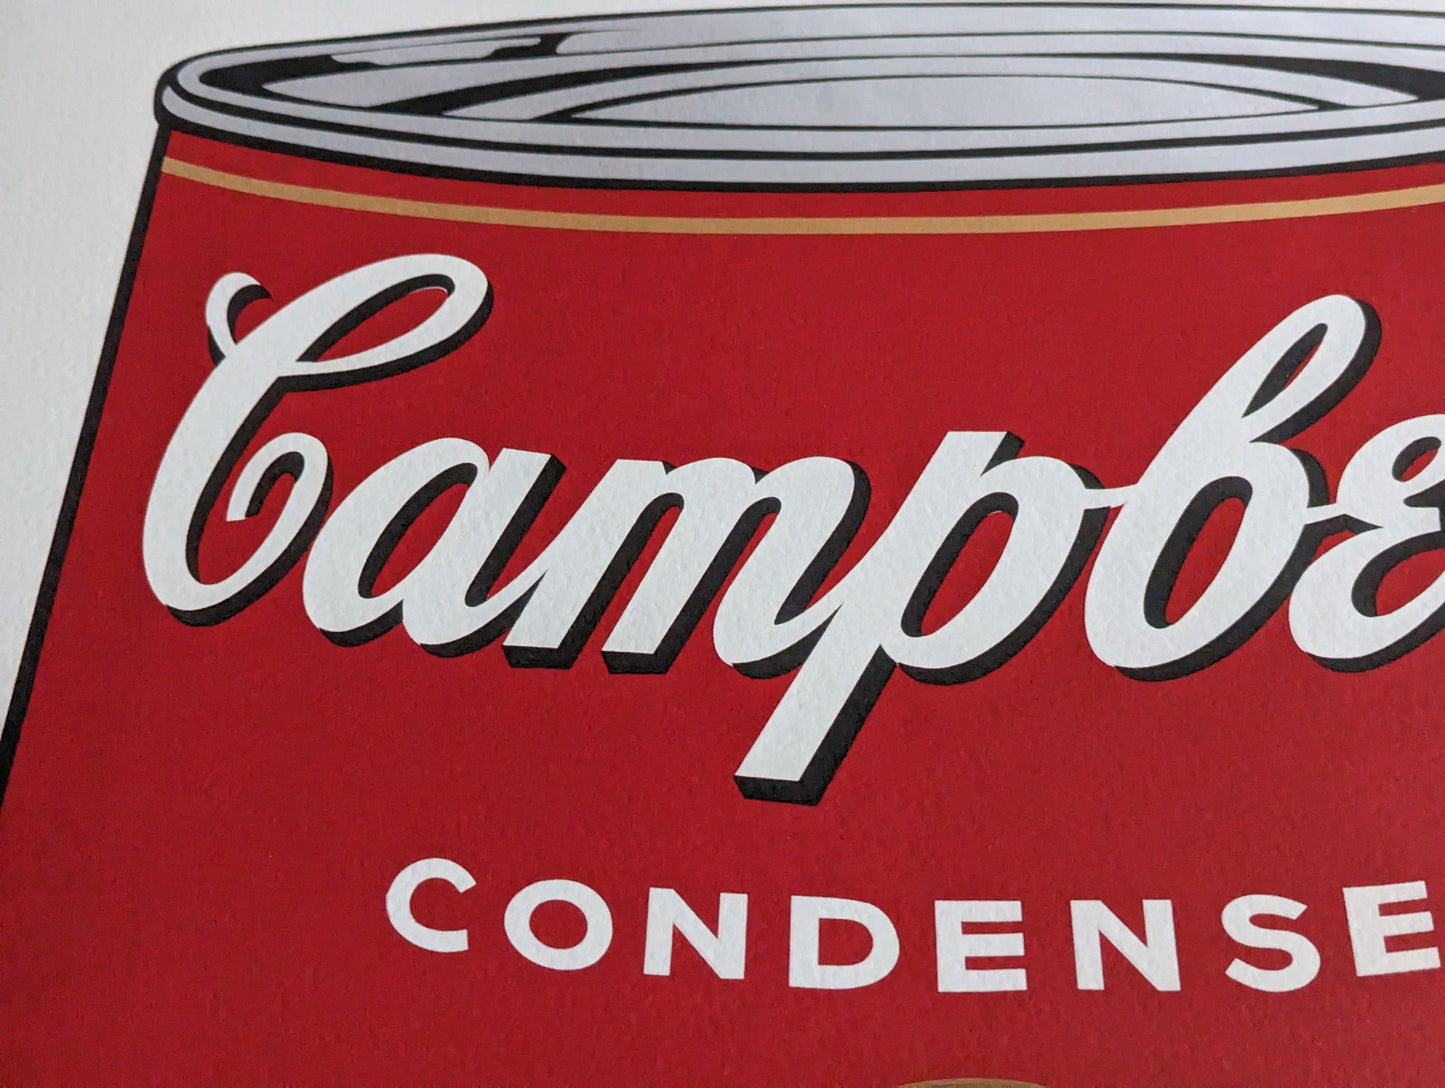 Andy Warhol - Campbell's soup (1980)